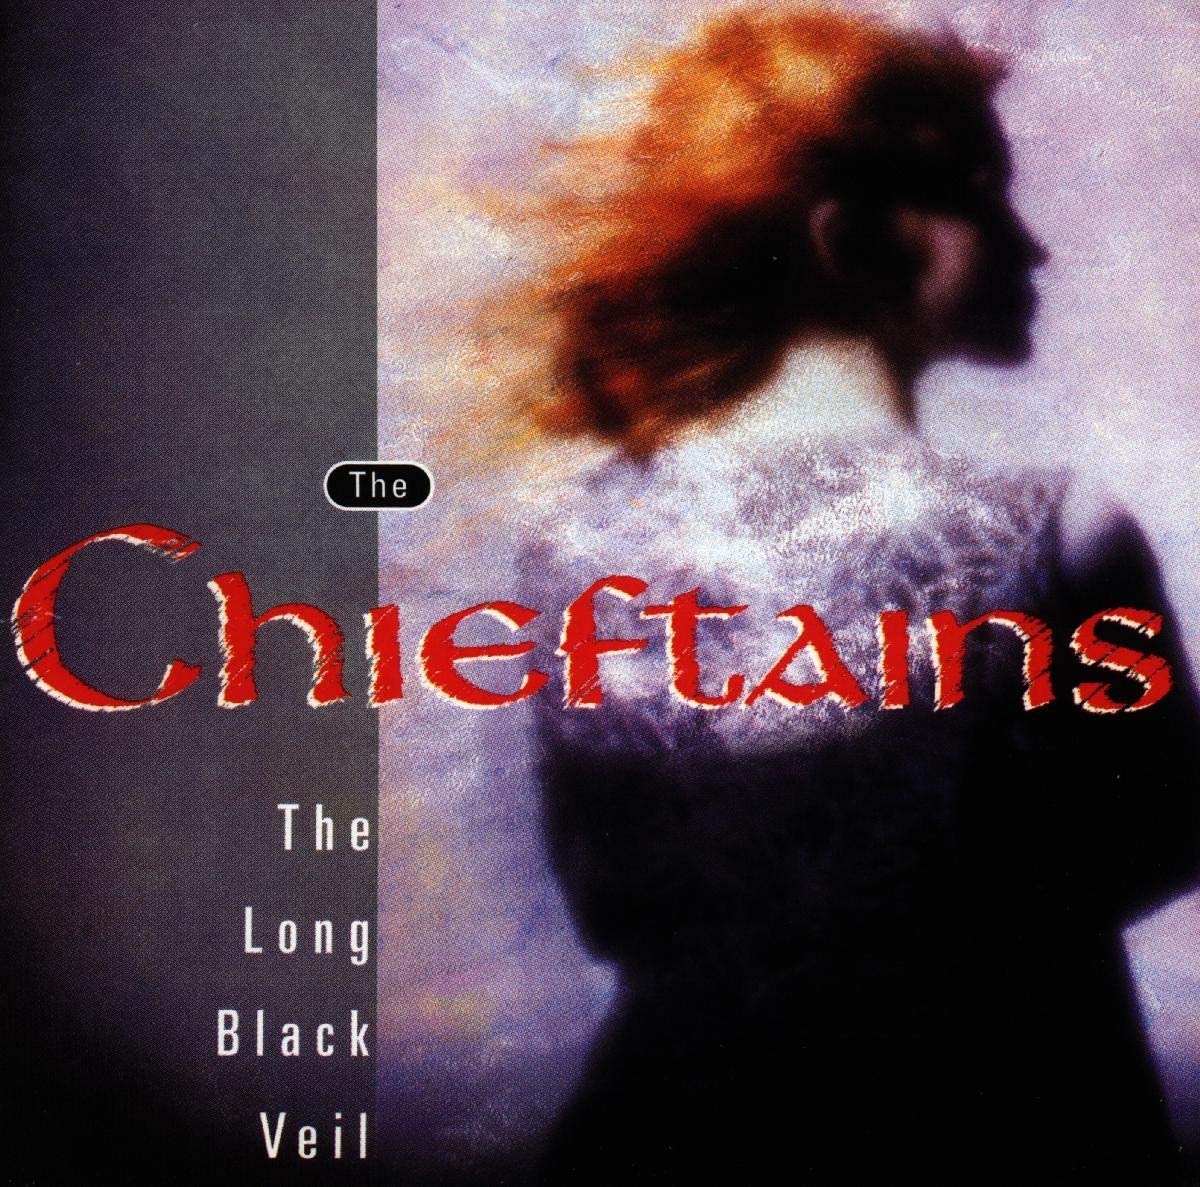 The Chieftains – The Long Black Veil CD